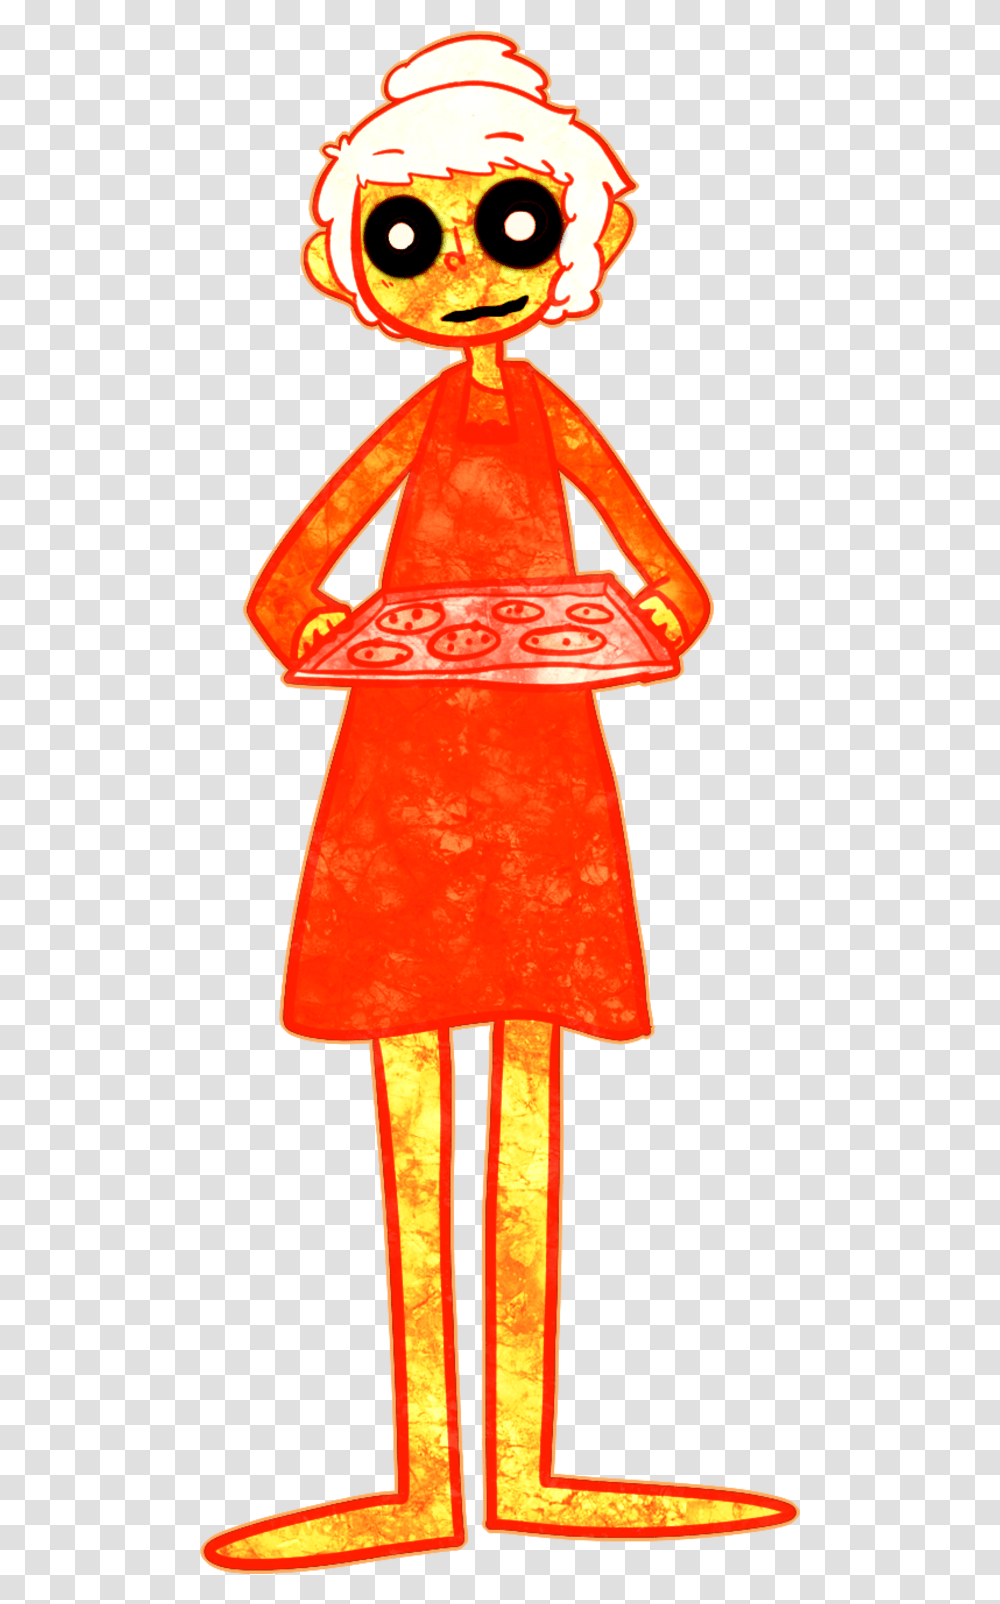 Cookie Clicker Clothing Orange Dress Art Fictional, Fire Hydrant Transparent Png